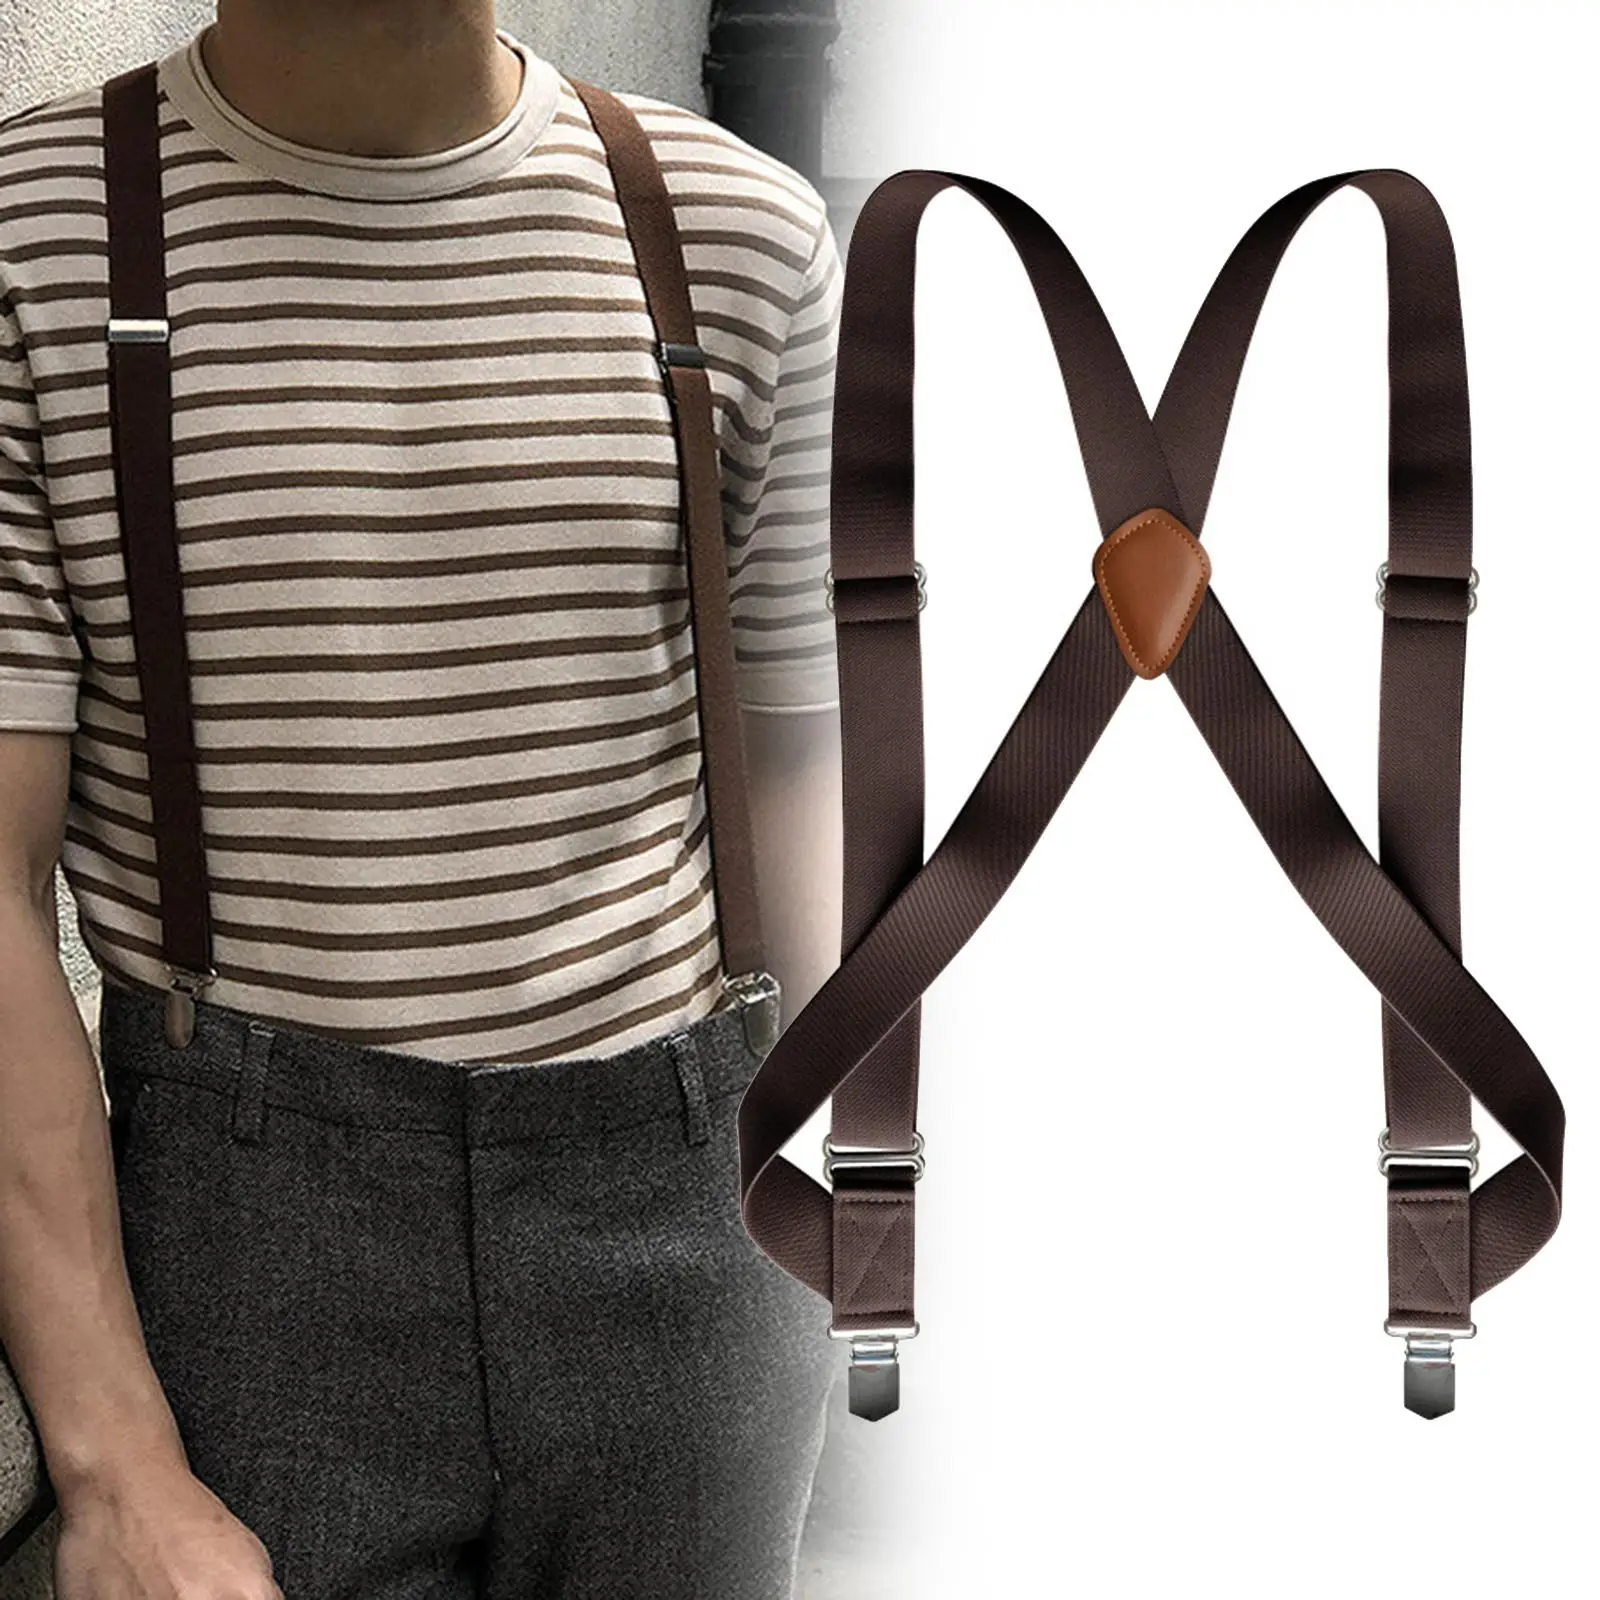 Mens Suspender with Clips Washable Adjustable Fits Jeans Big Tall Friends